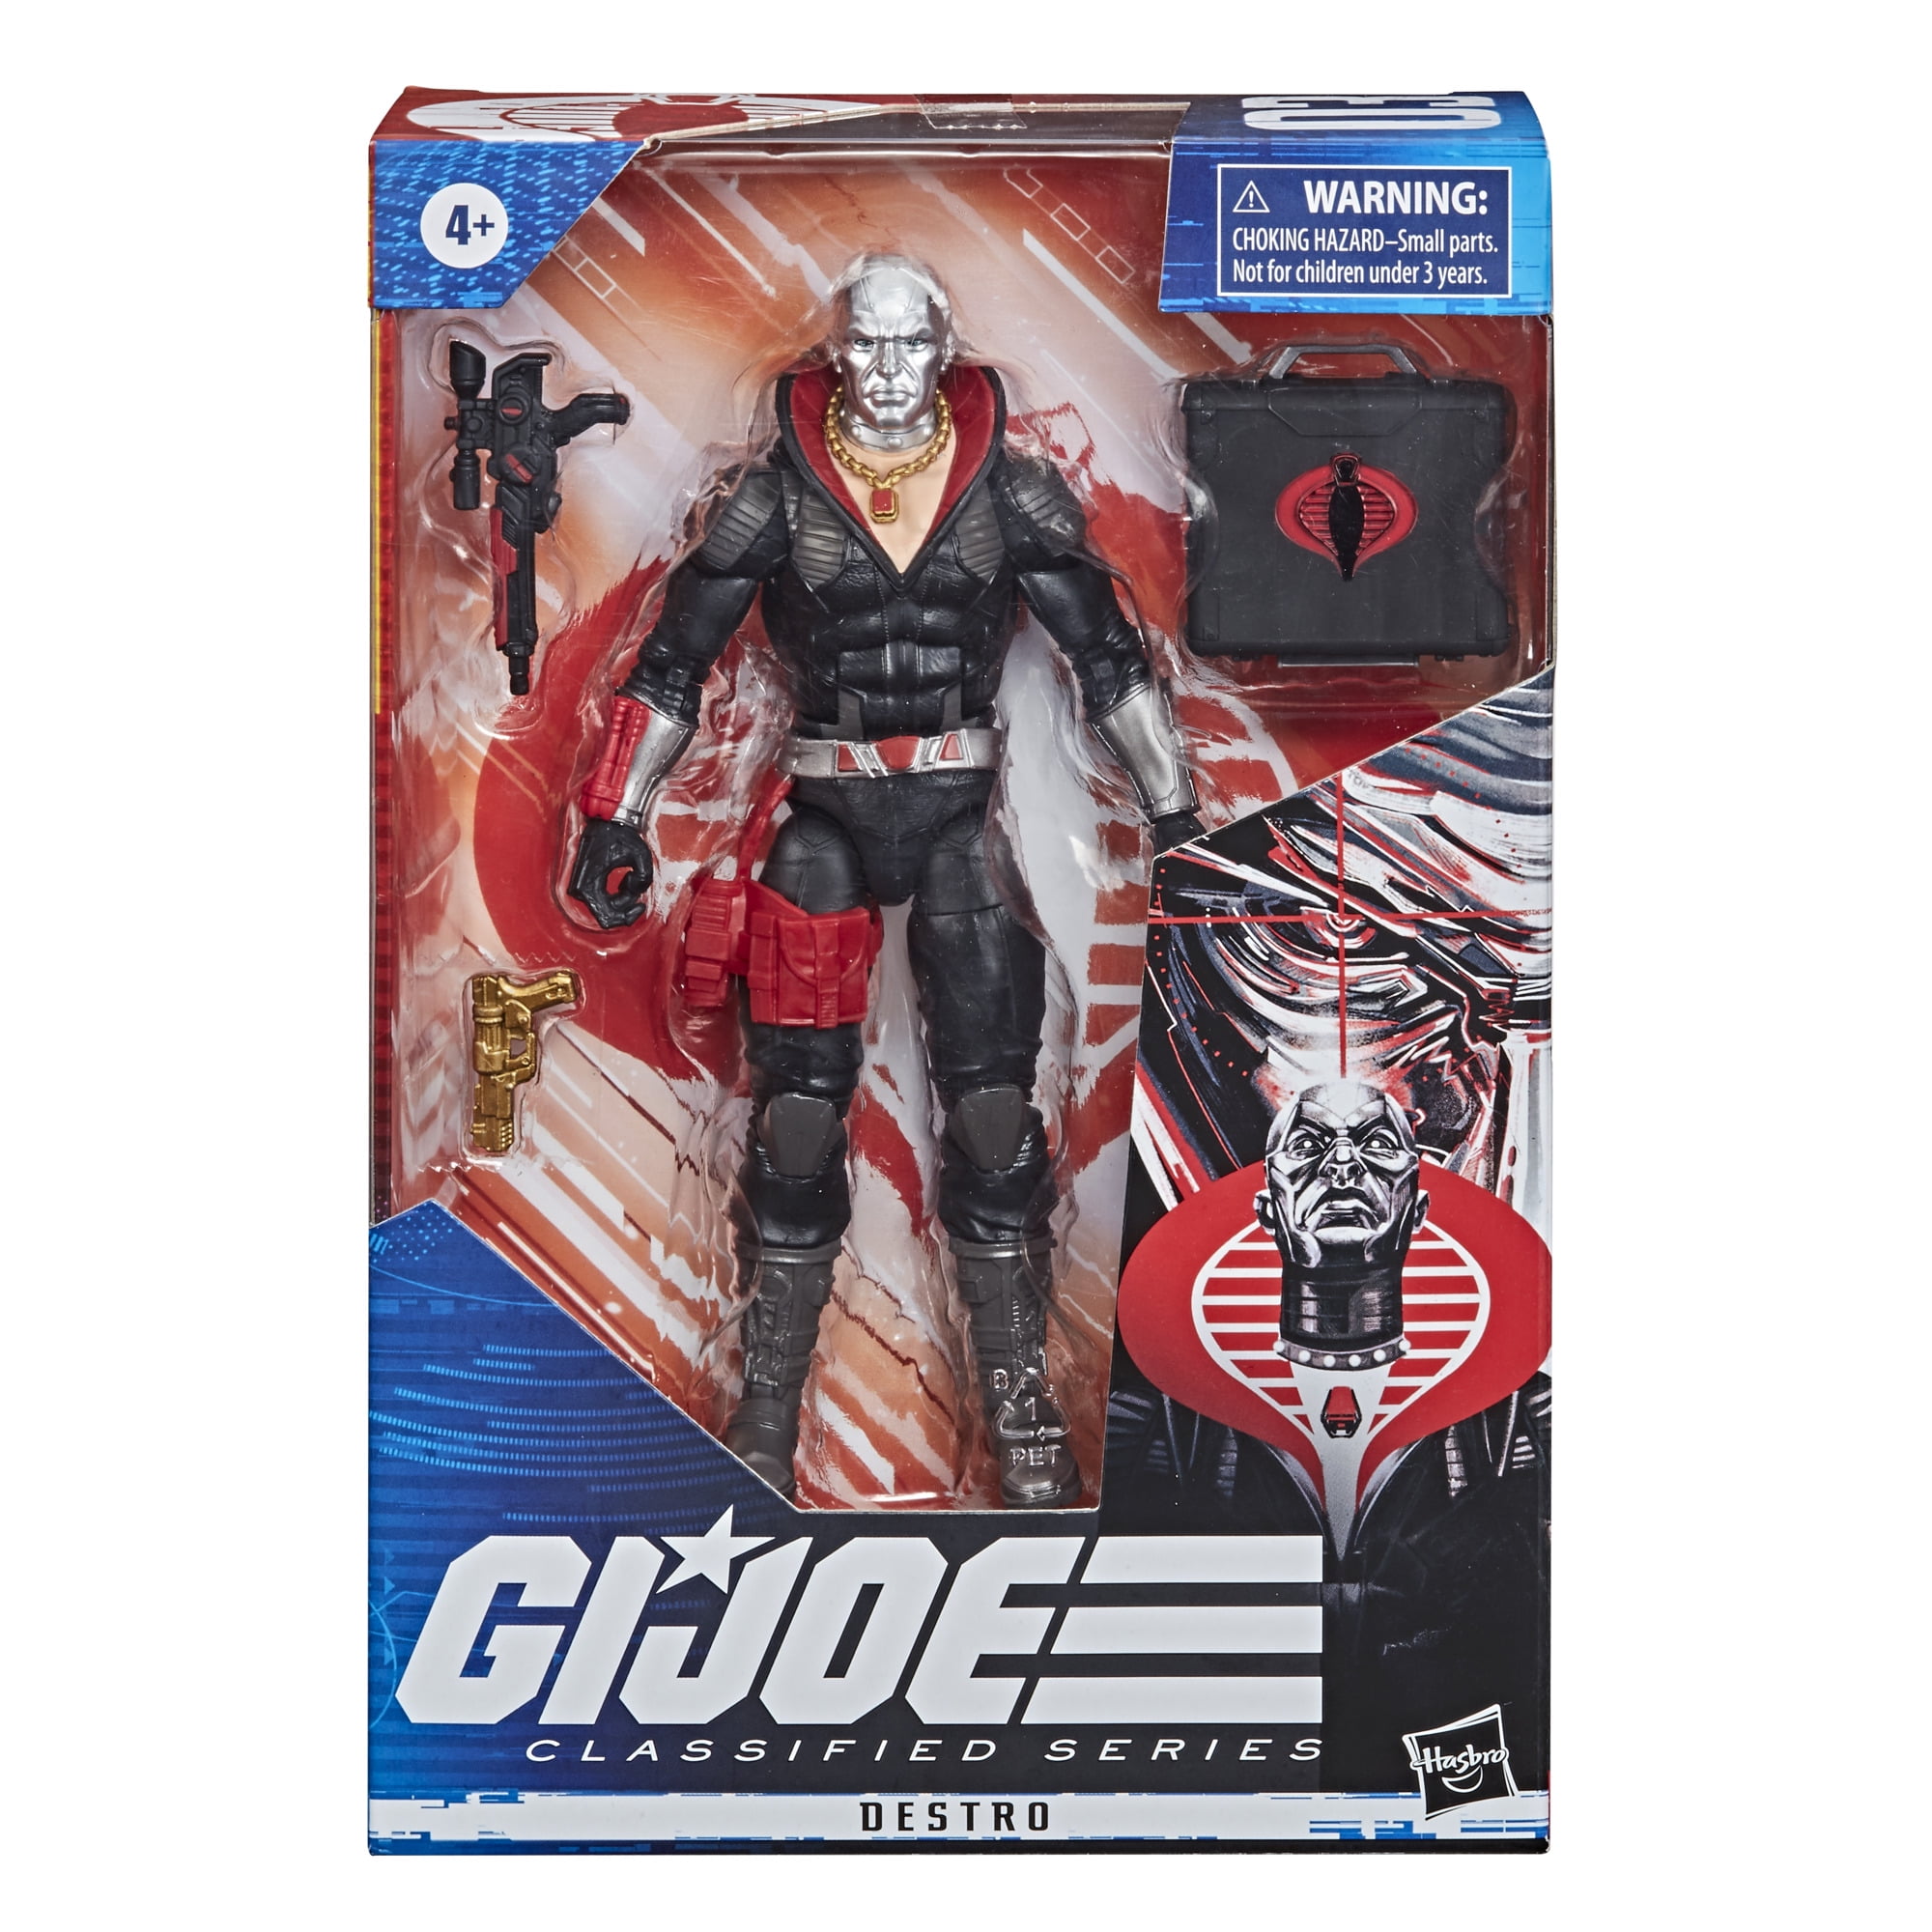 G.I. Joe Classified Serie #03 Destro Premium Collectible 6-Inch Scale  Action Figure with 3 Accessories